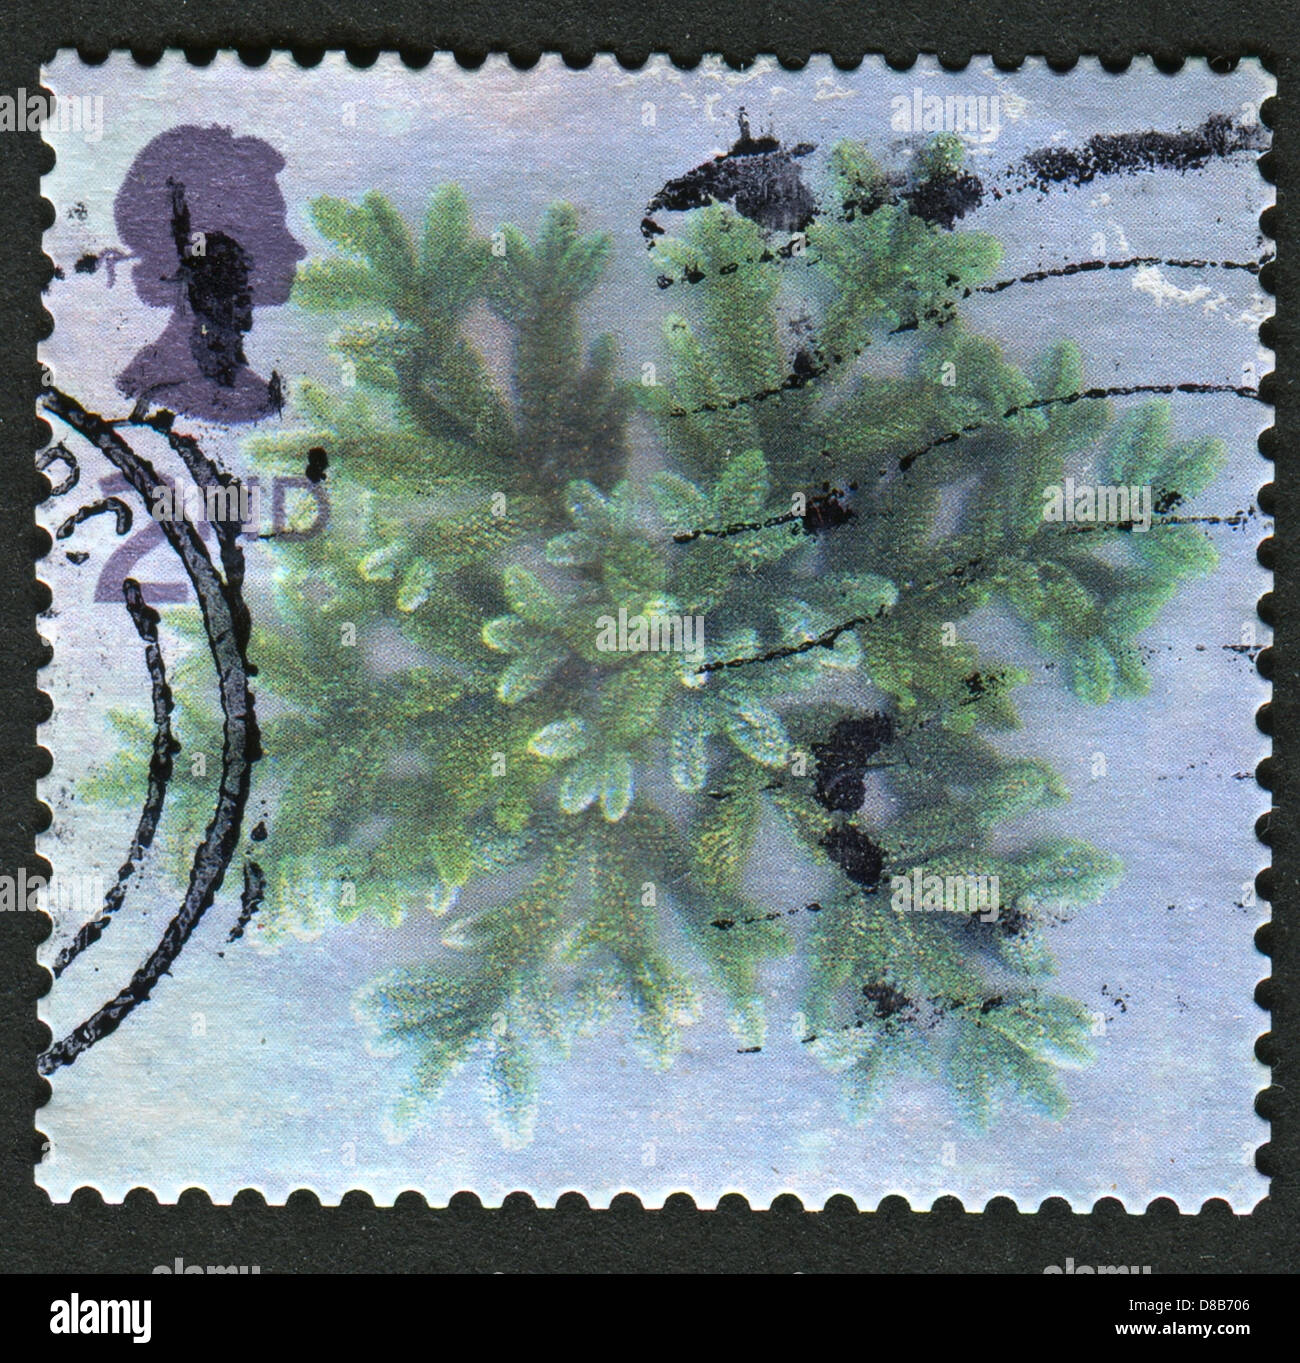 UK - CIRCA 2002: A stamp printed in UK shows image of the Blue Spruce Star, circa 2002.  Stock Photo